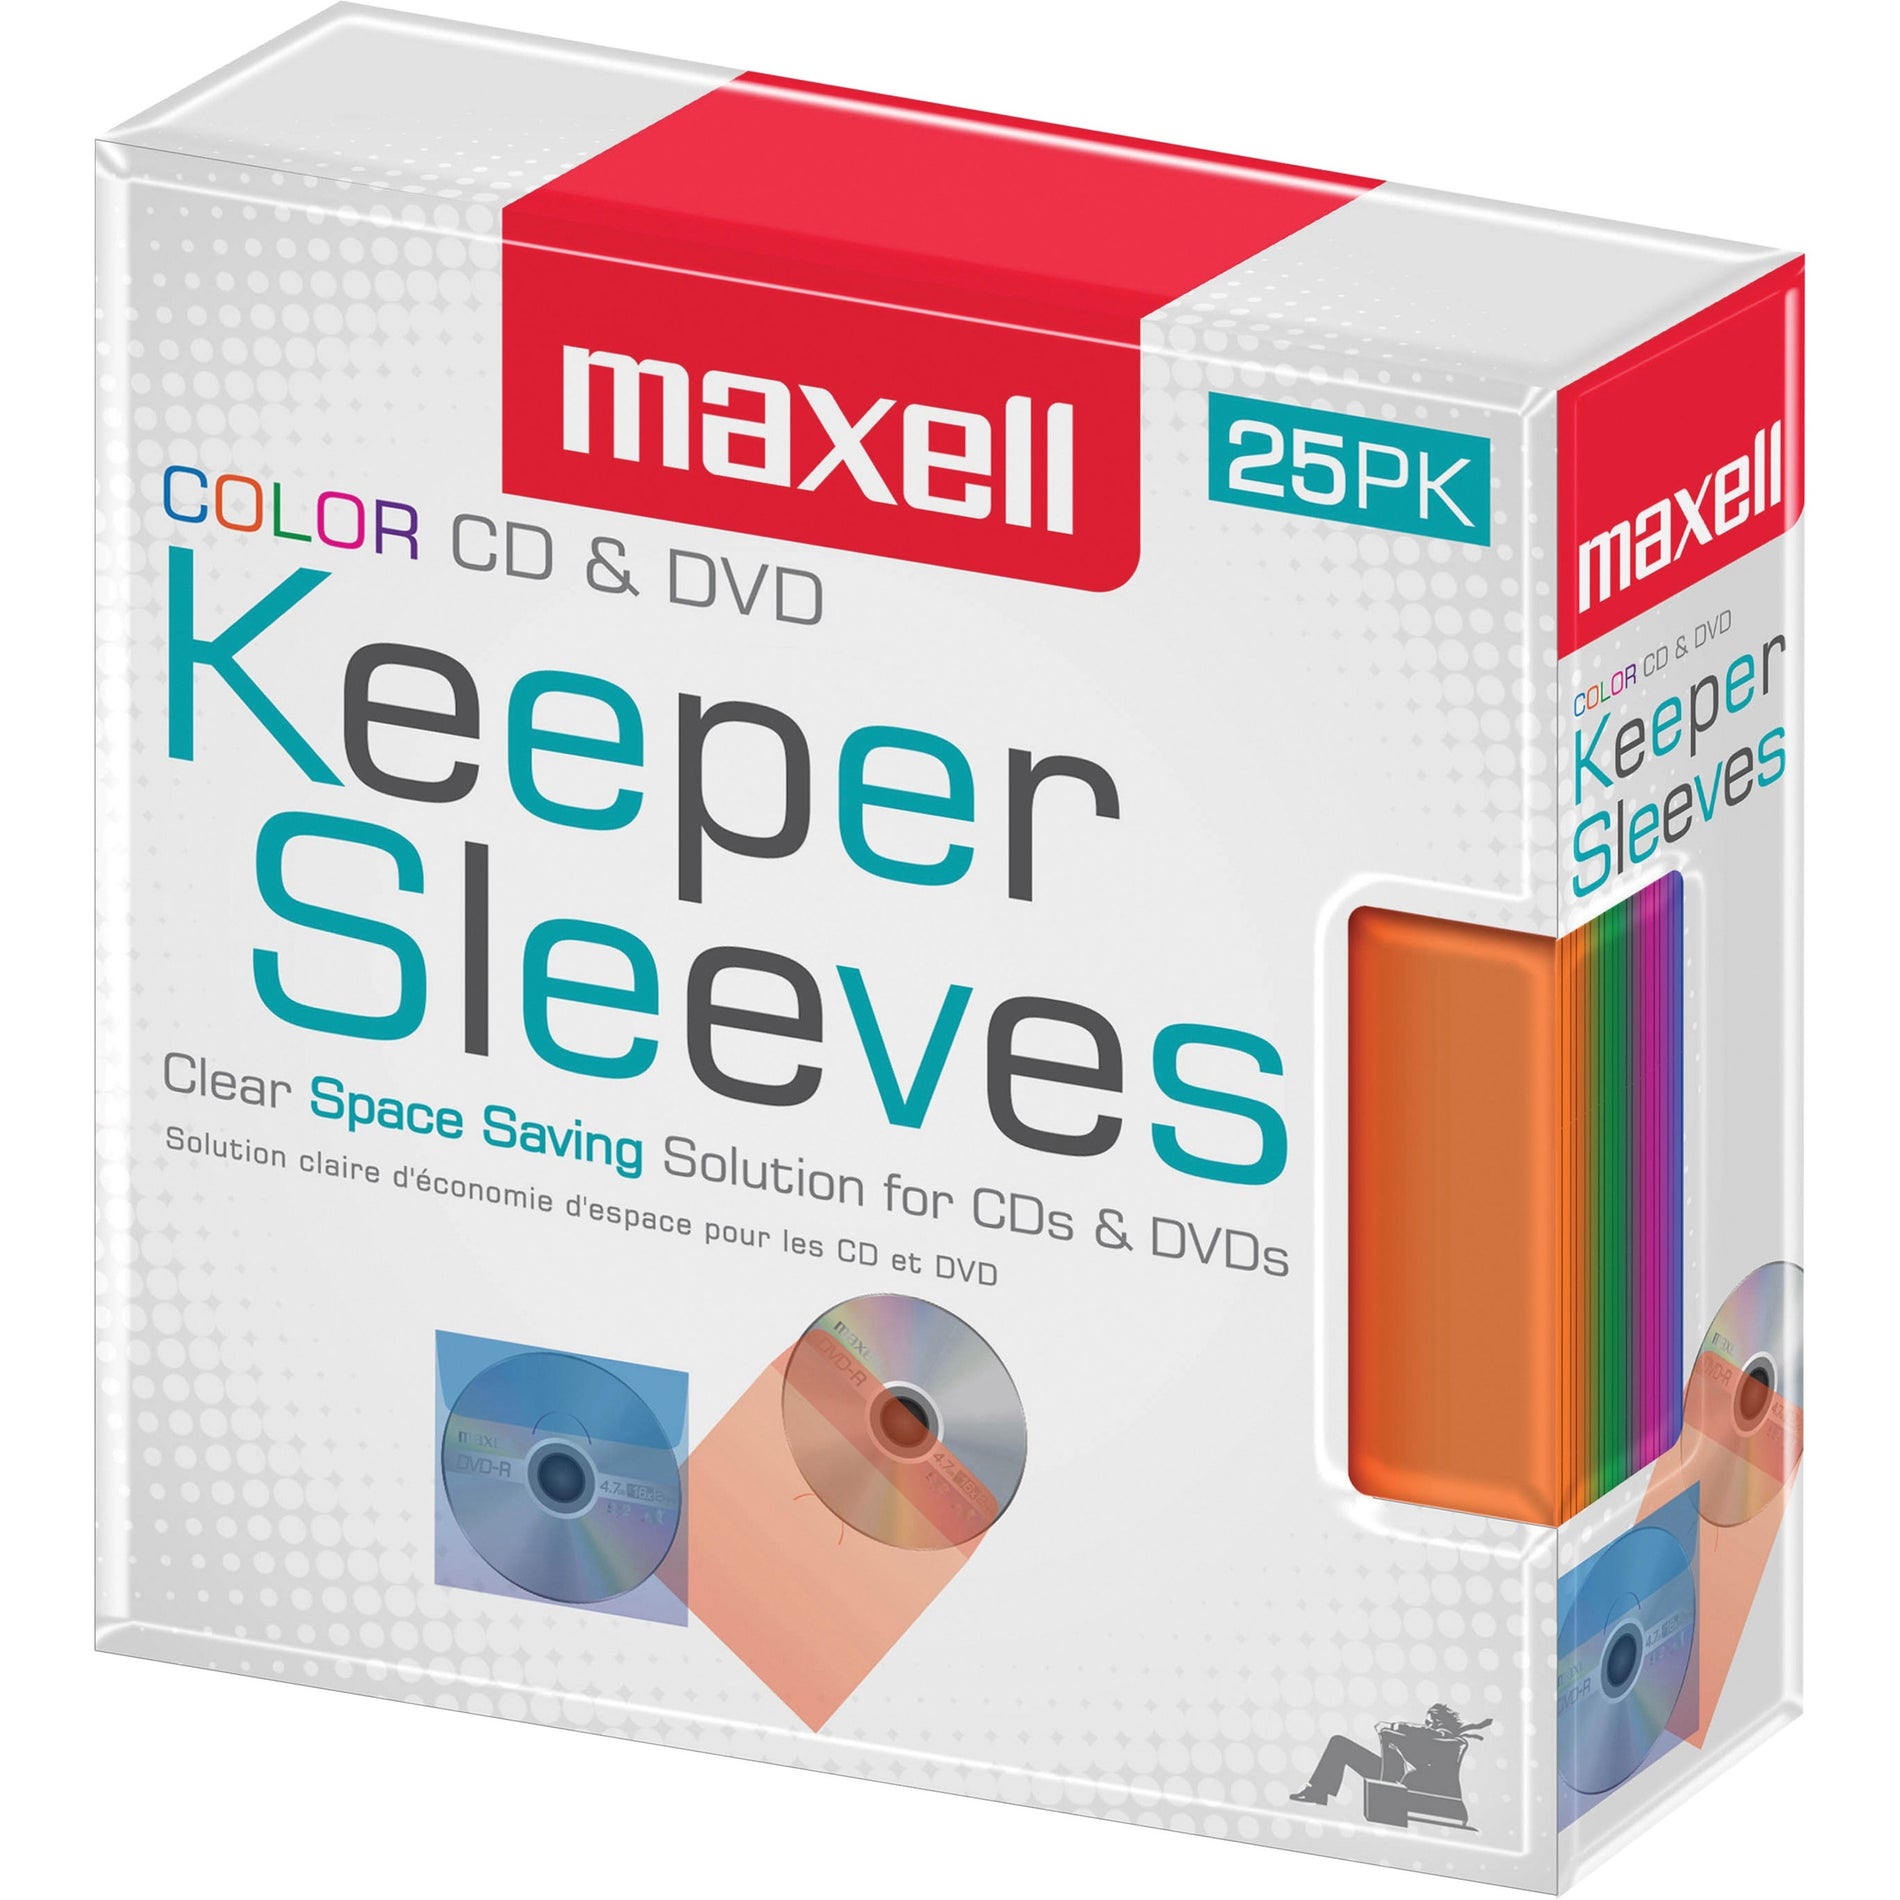 Maxell 190151 CD/DVD Keeper Sleeves, Plastic, Assorted Colors, Pack of 25